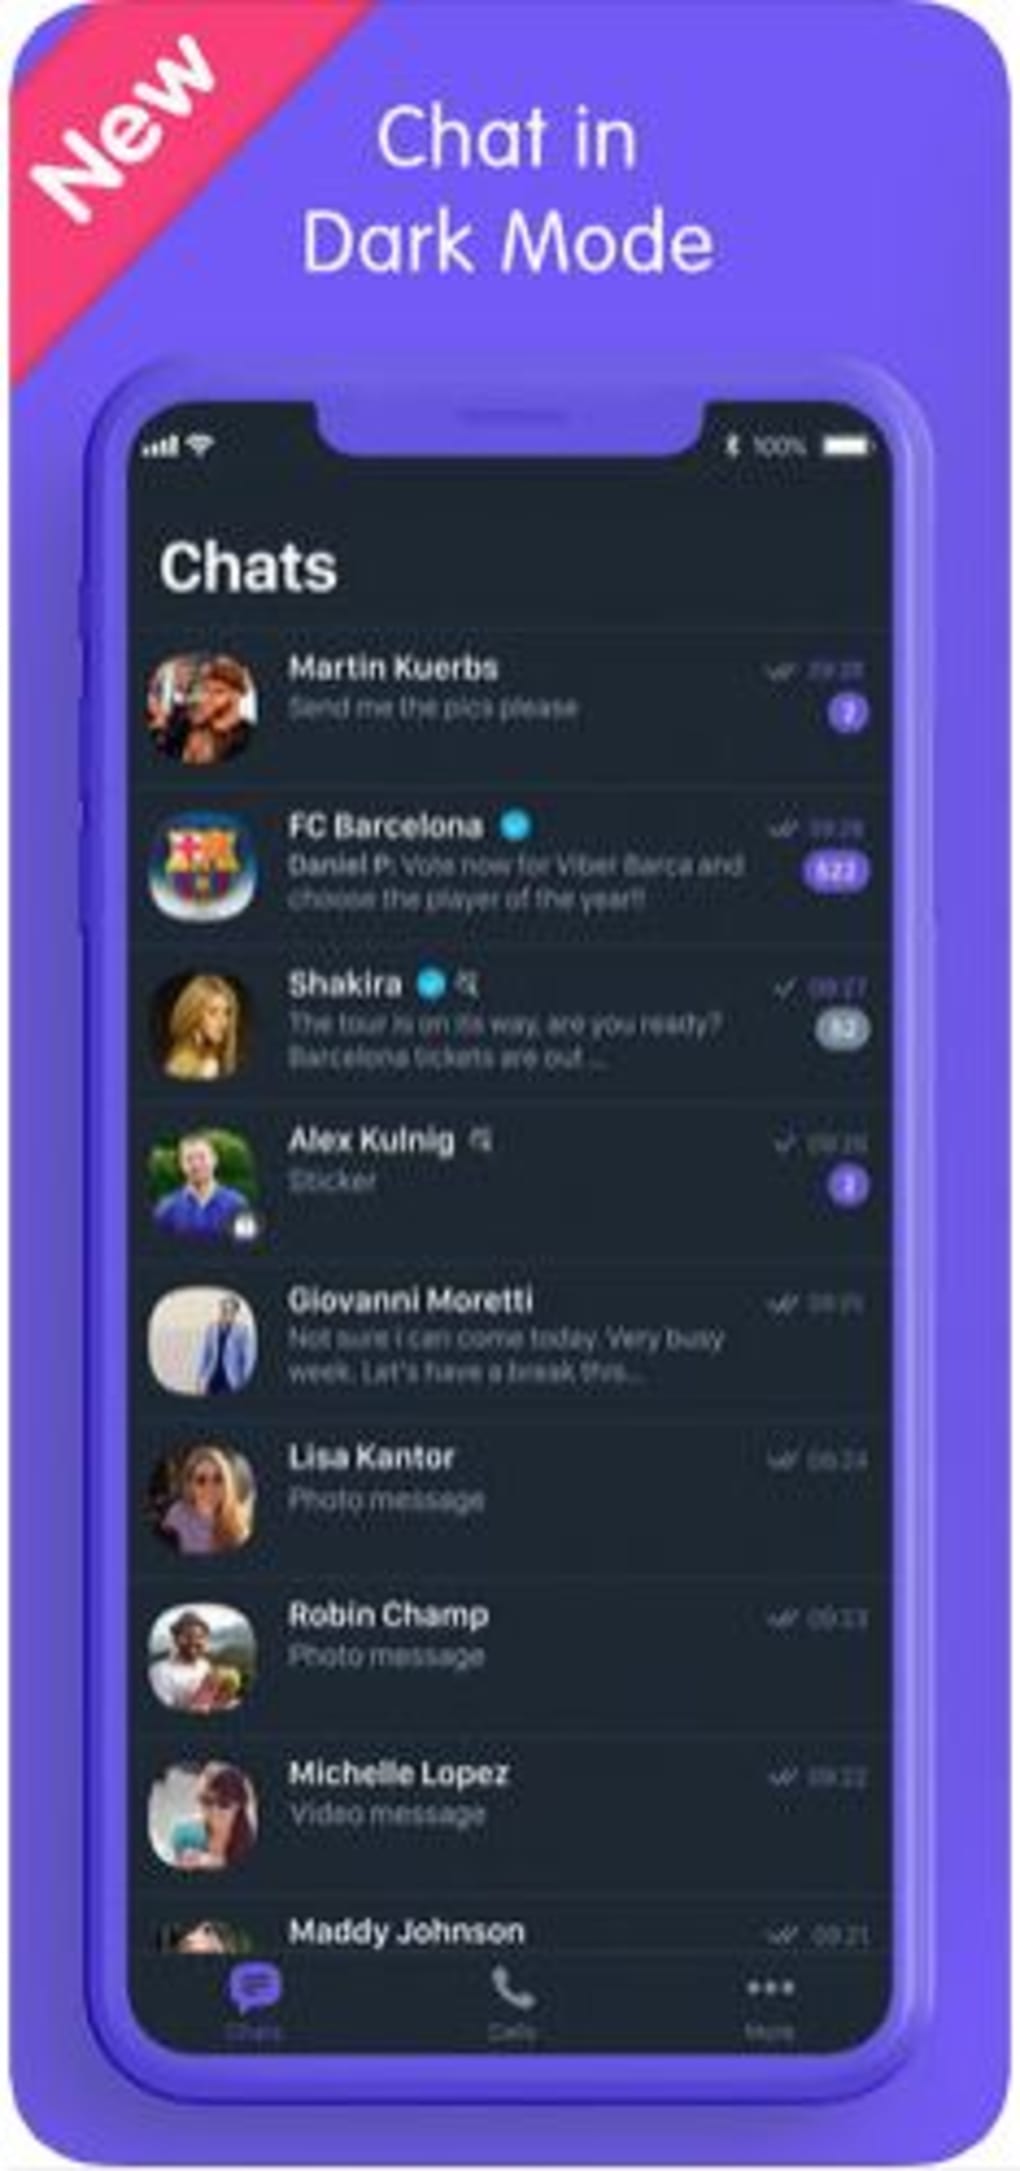 viber download for ipad 1